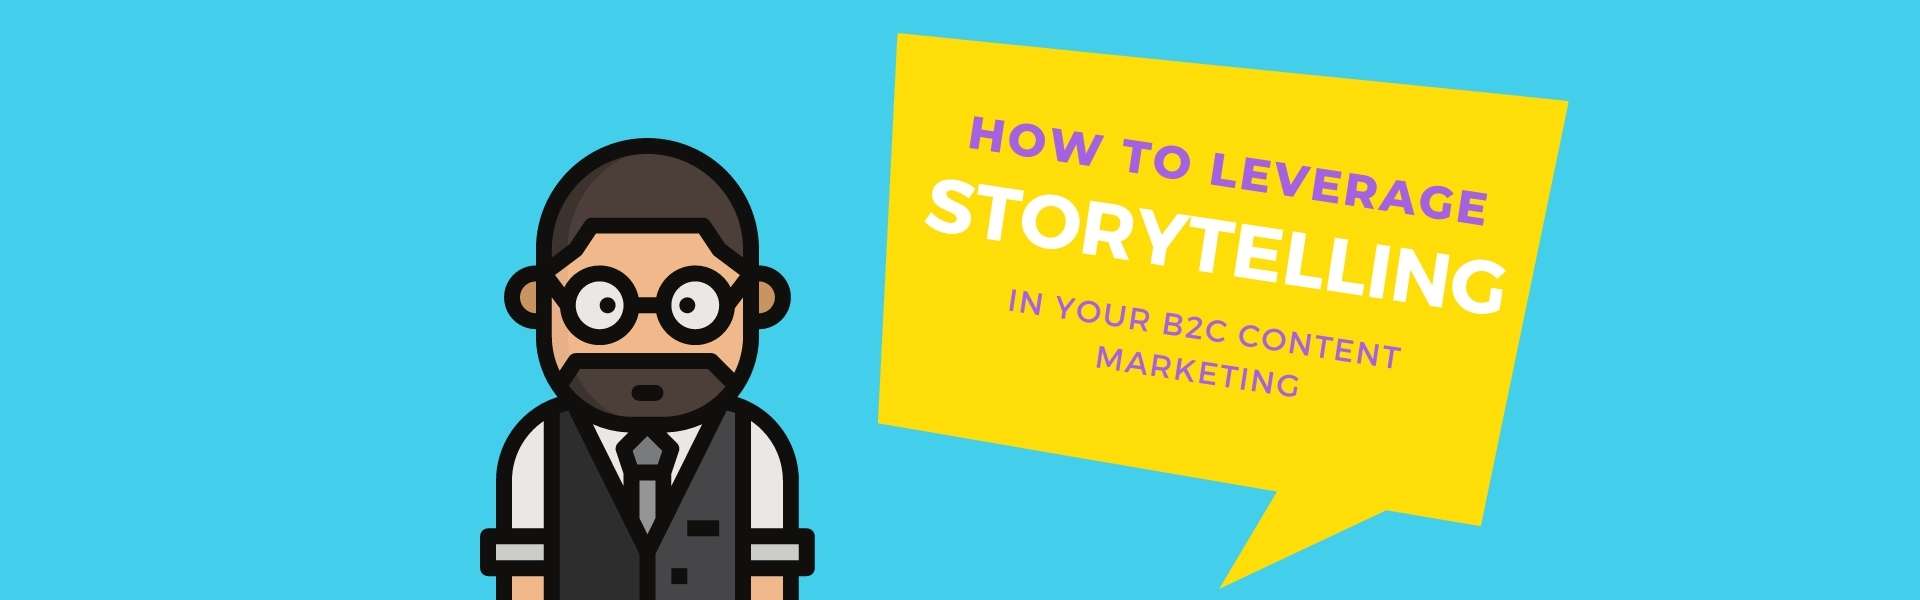 How to leverage storytelling in your B2C content marketing